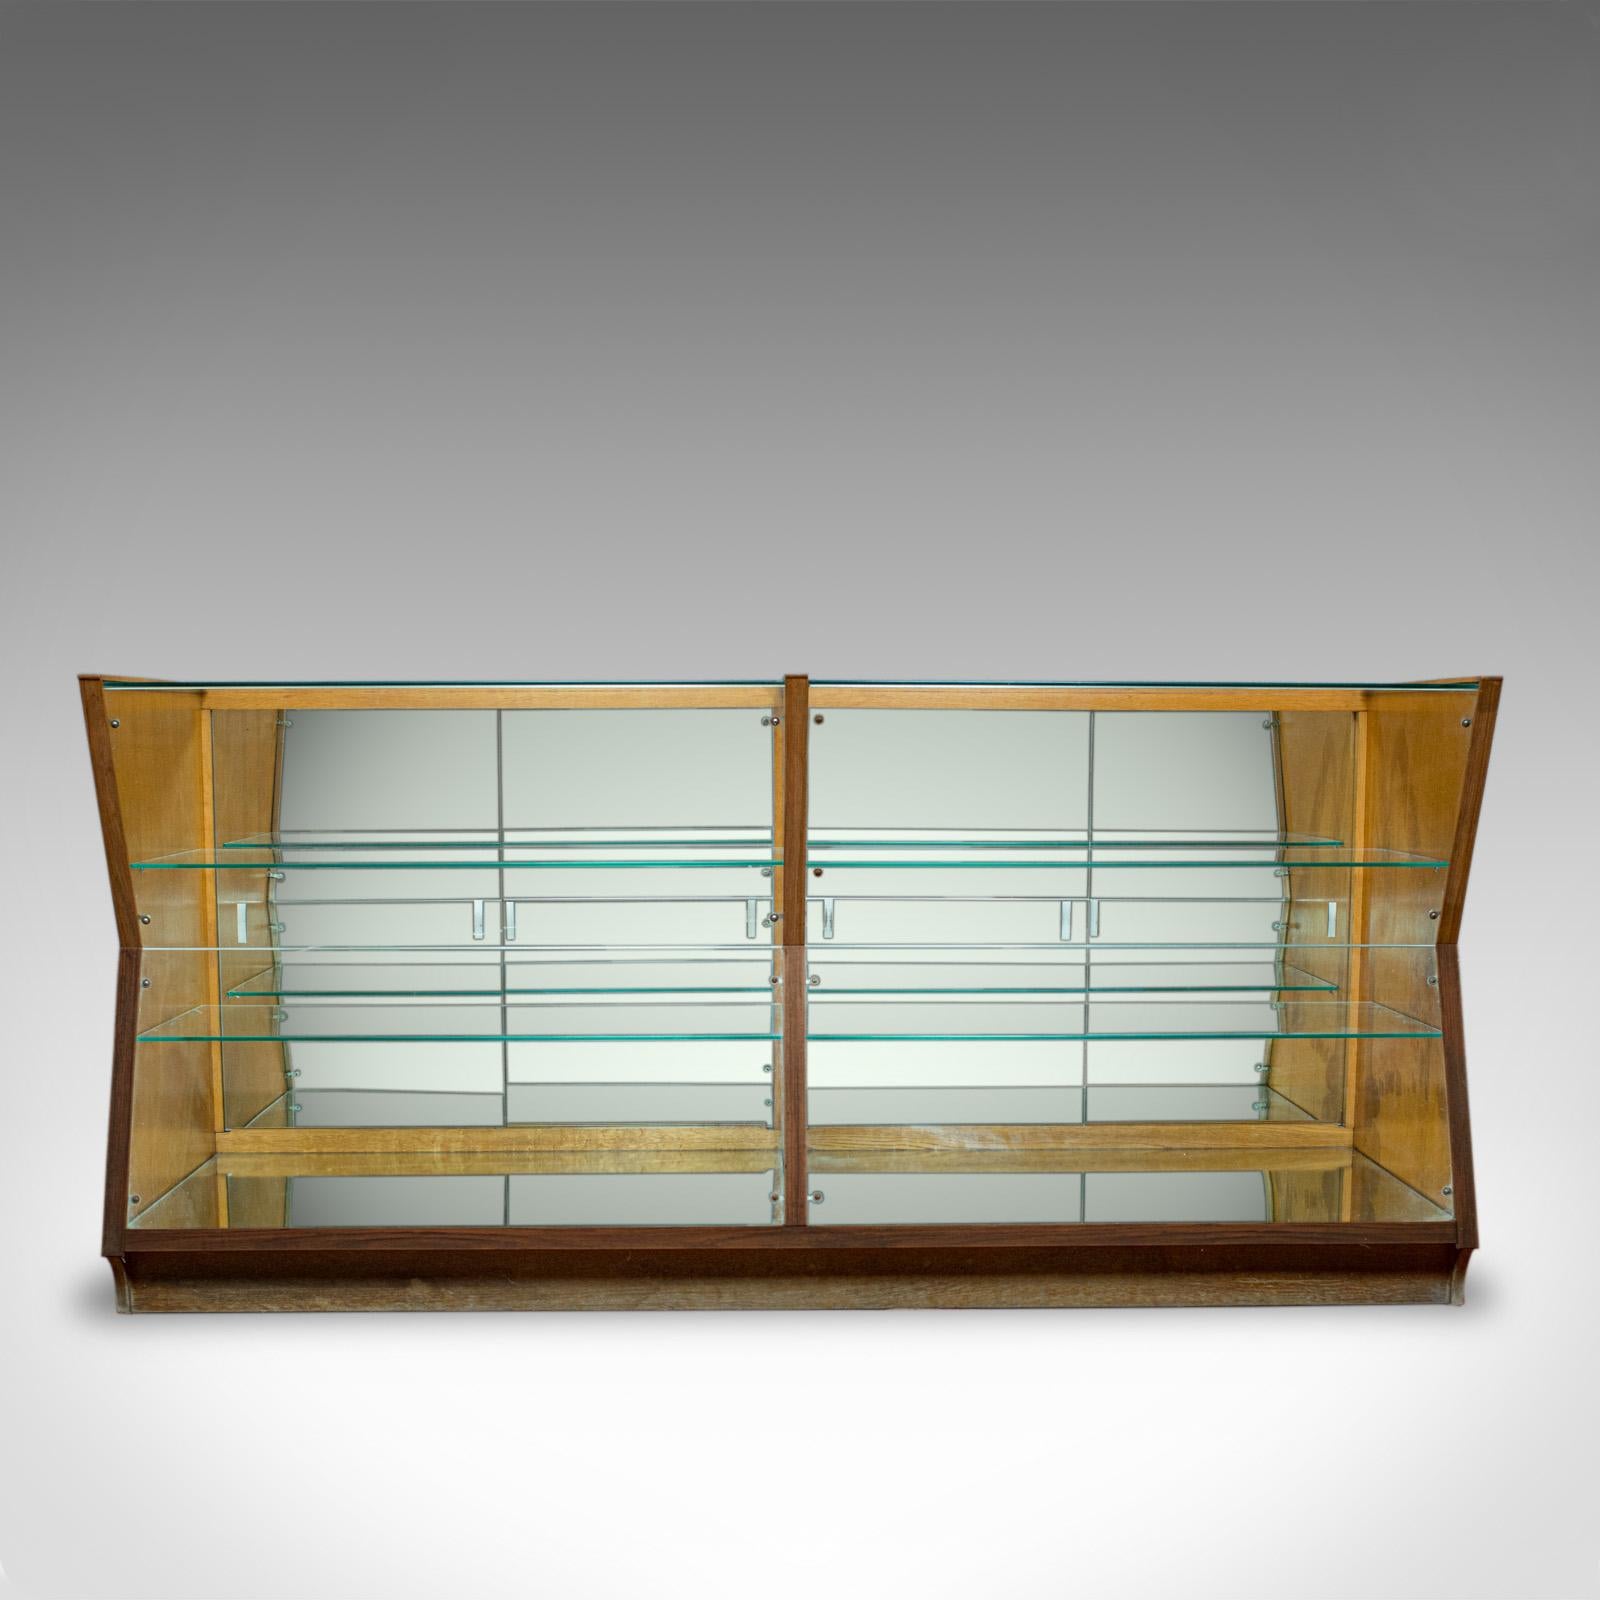 This is a large vintage display cabinet. An English glass and oak, retail shop-fitting showcase in the Art Deco taste, dating to the early 1900s, circa 1930.

Select cuts of oak with fine grain interest and a desirable aged patina
Original glass